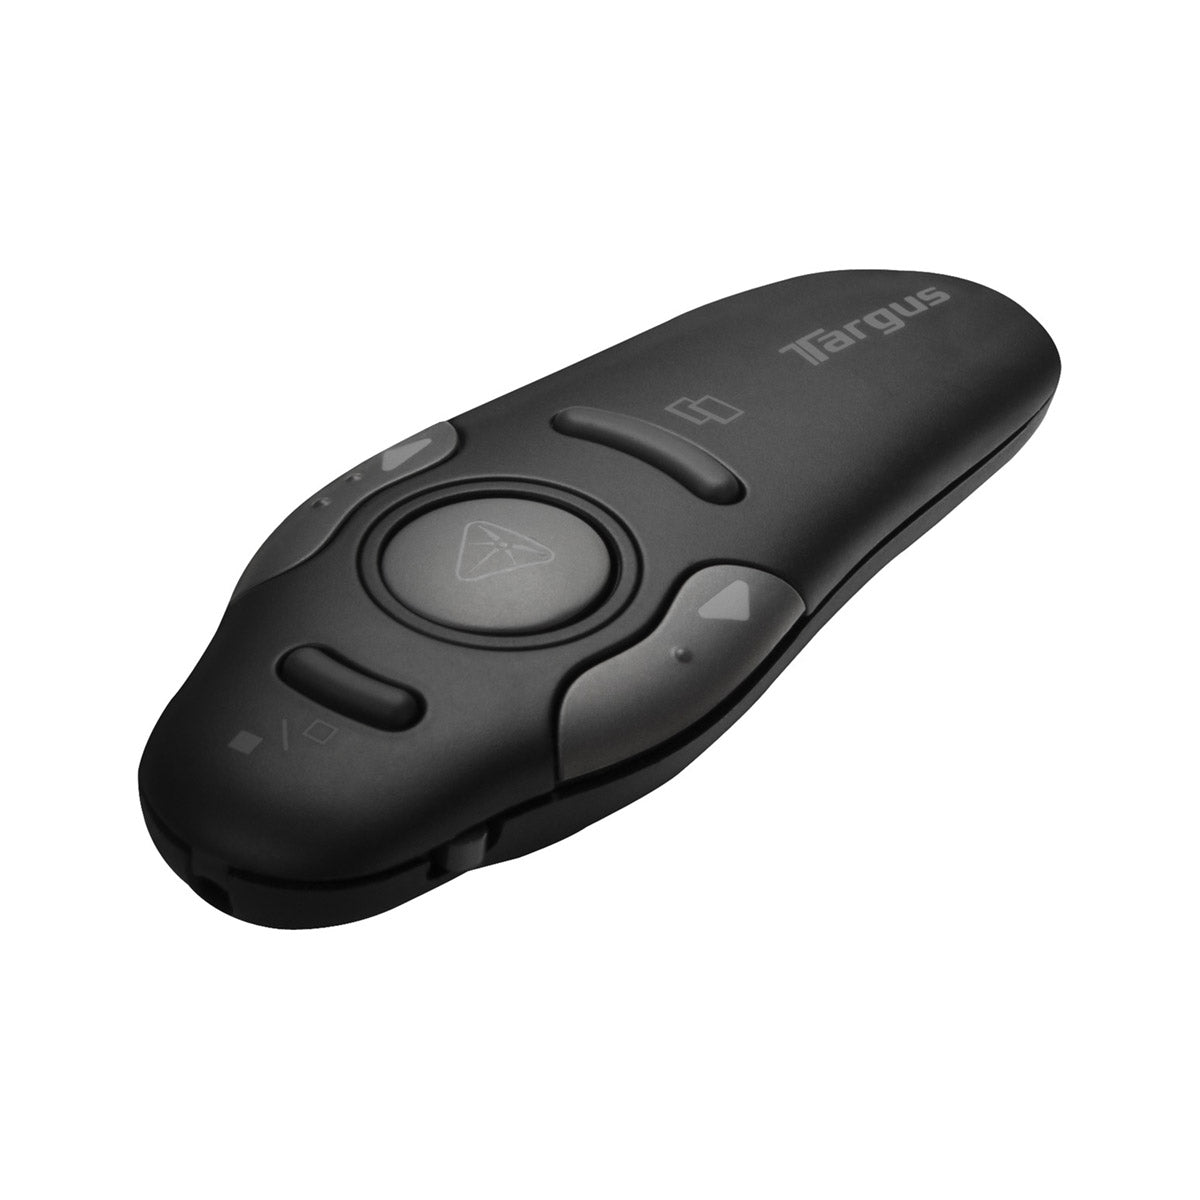 Targus P16 Wireless Presenter with Laser Pointer w/Soft-touch Material